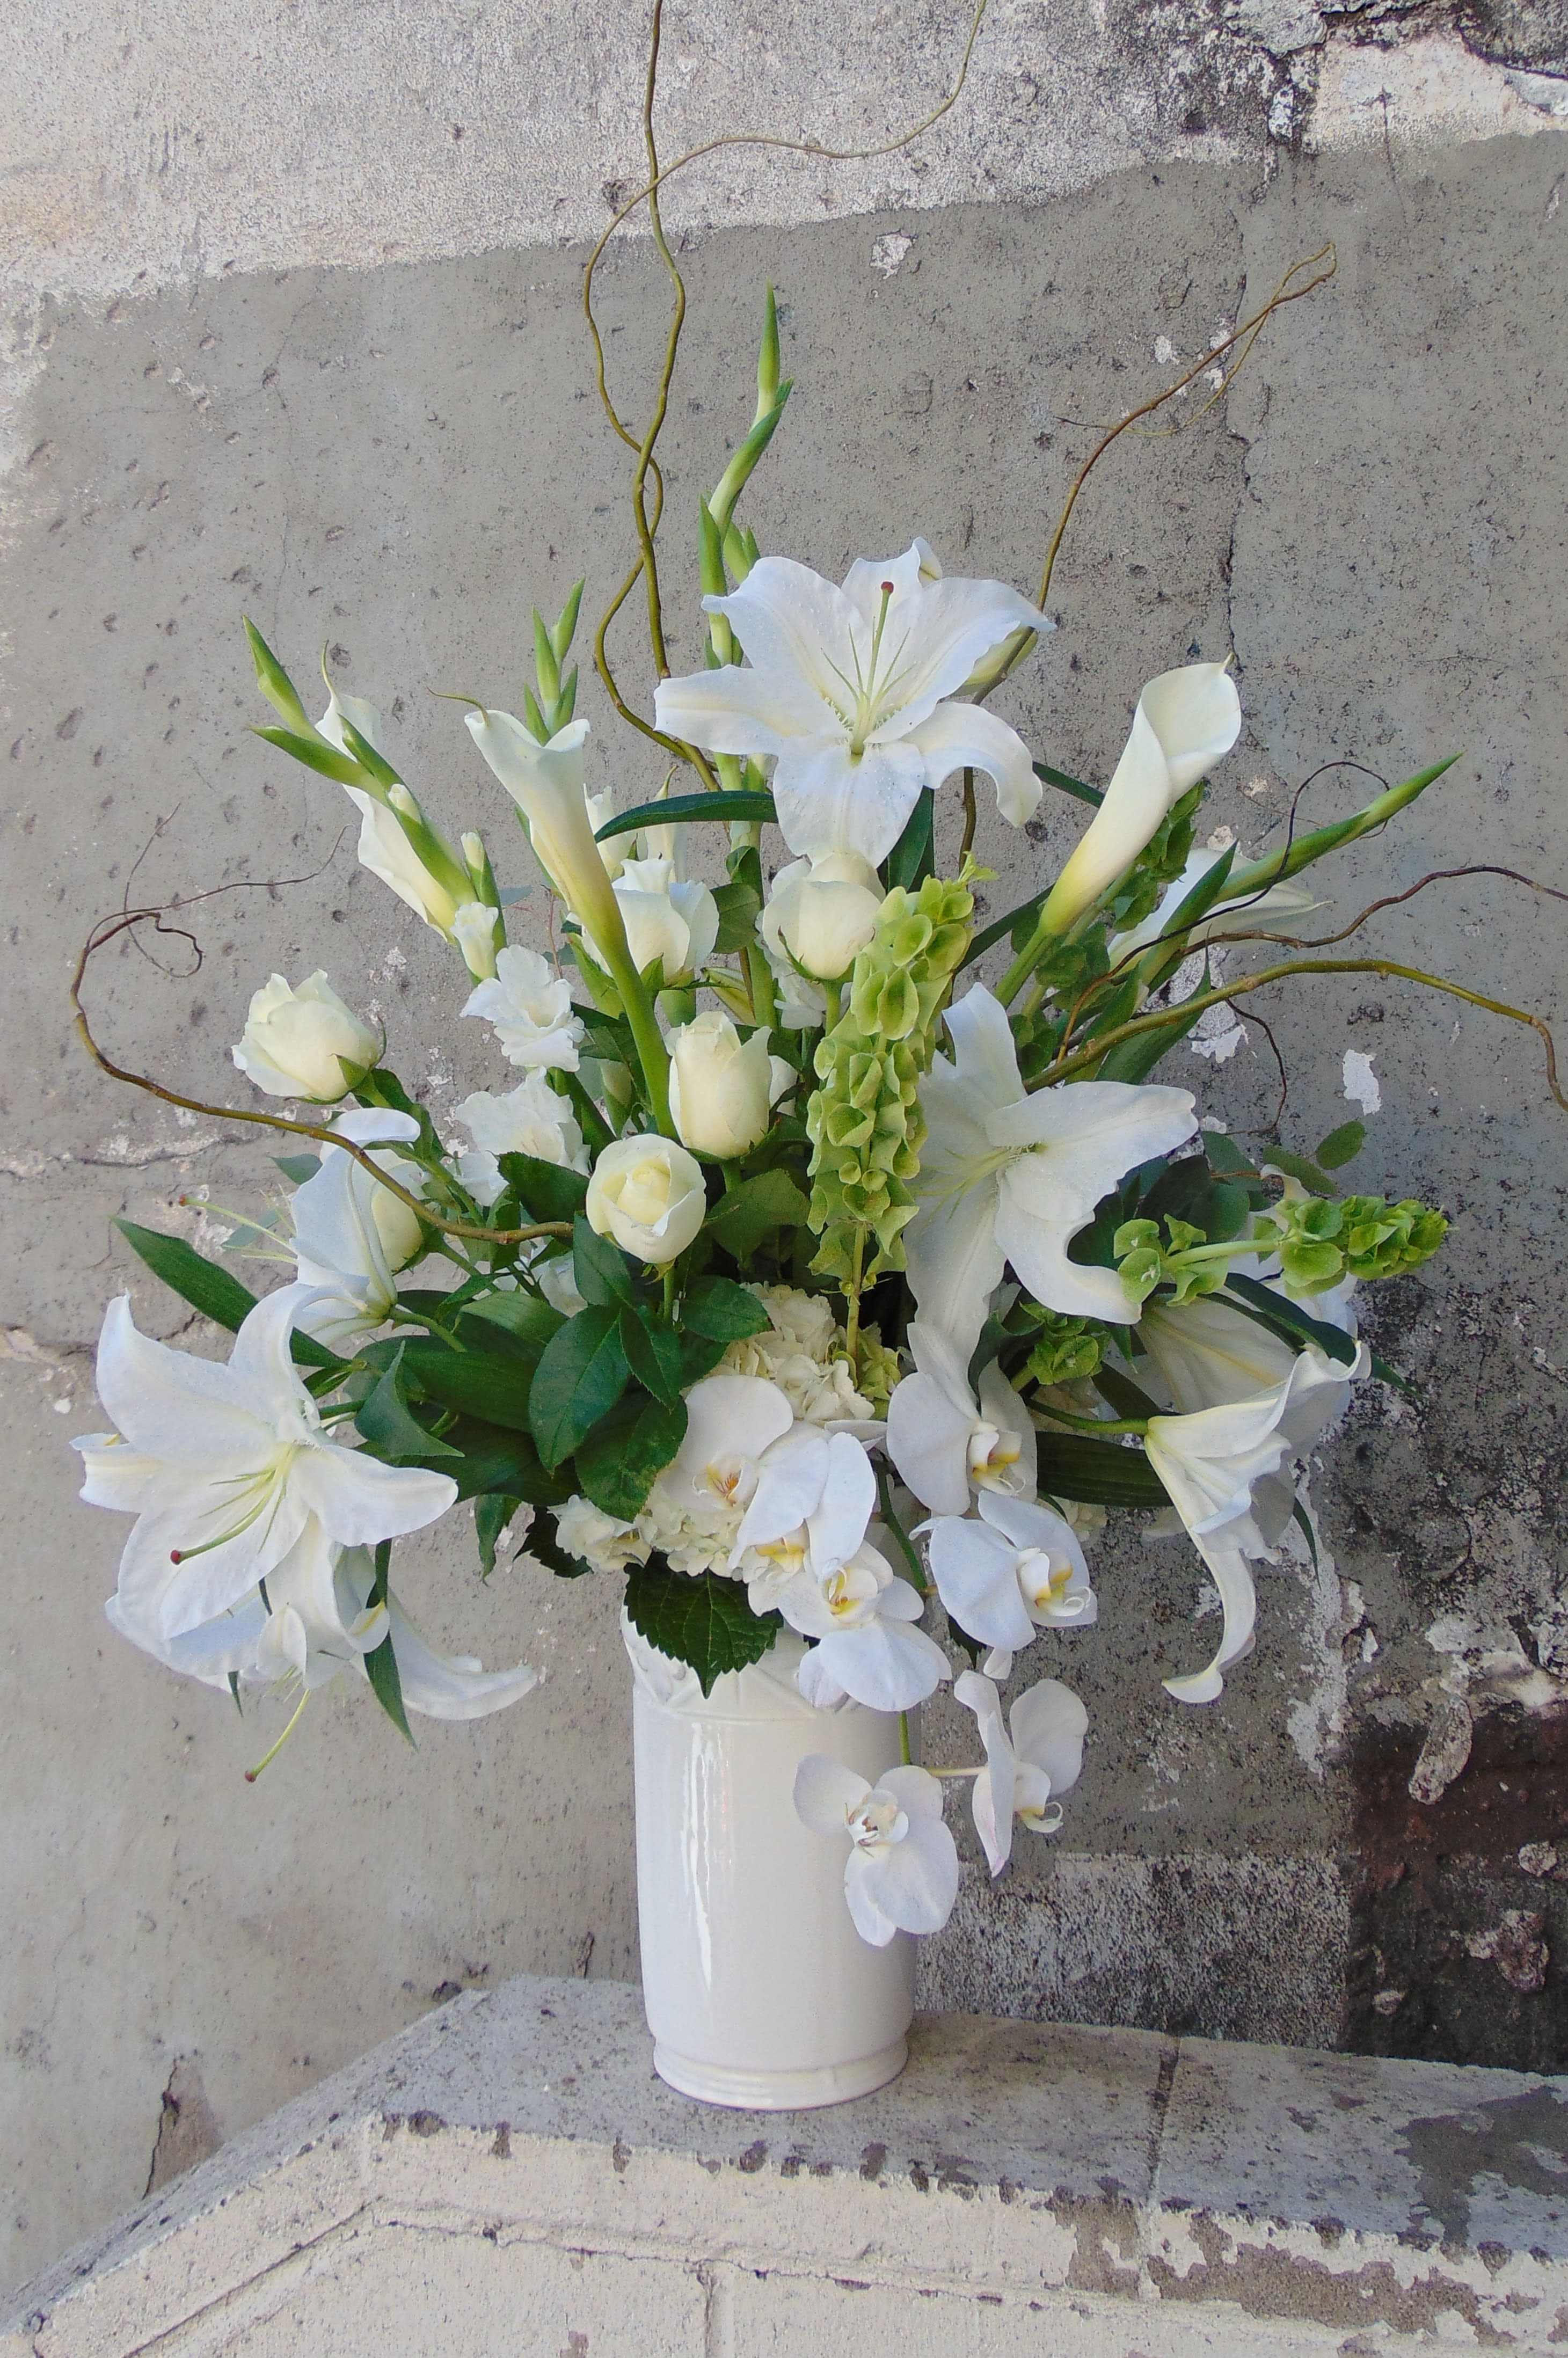 Elegant Garden - One of our larger and more opulent designs, features a wide variety of premium blooms in all white. Pictured is our *Premium* upgraded sizing. Overall height to reach above 4ft tall.